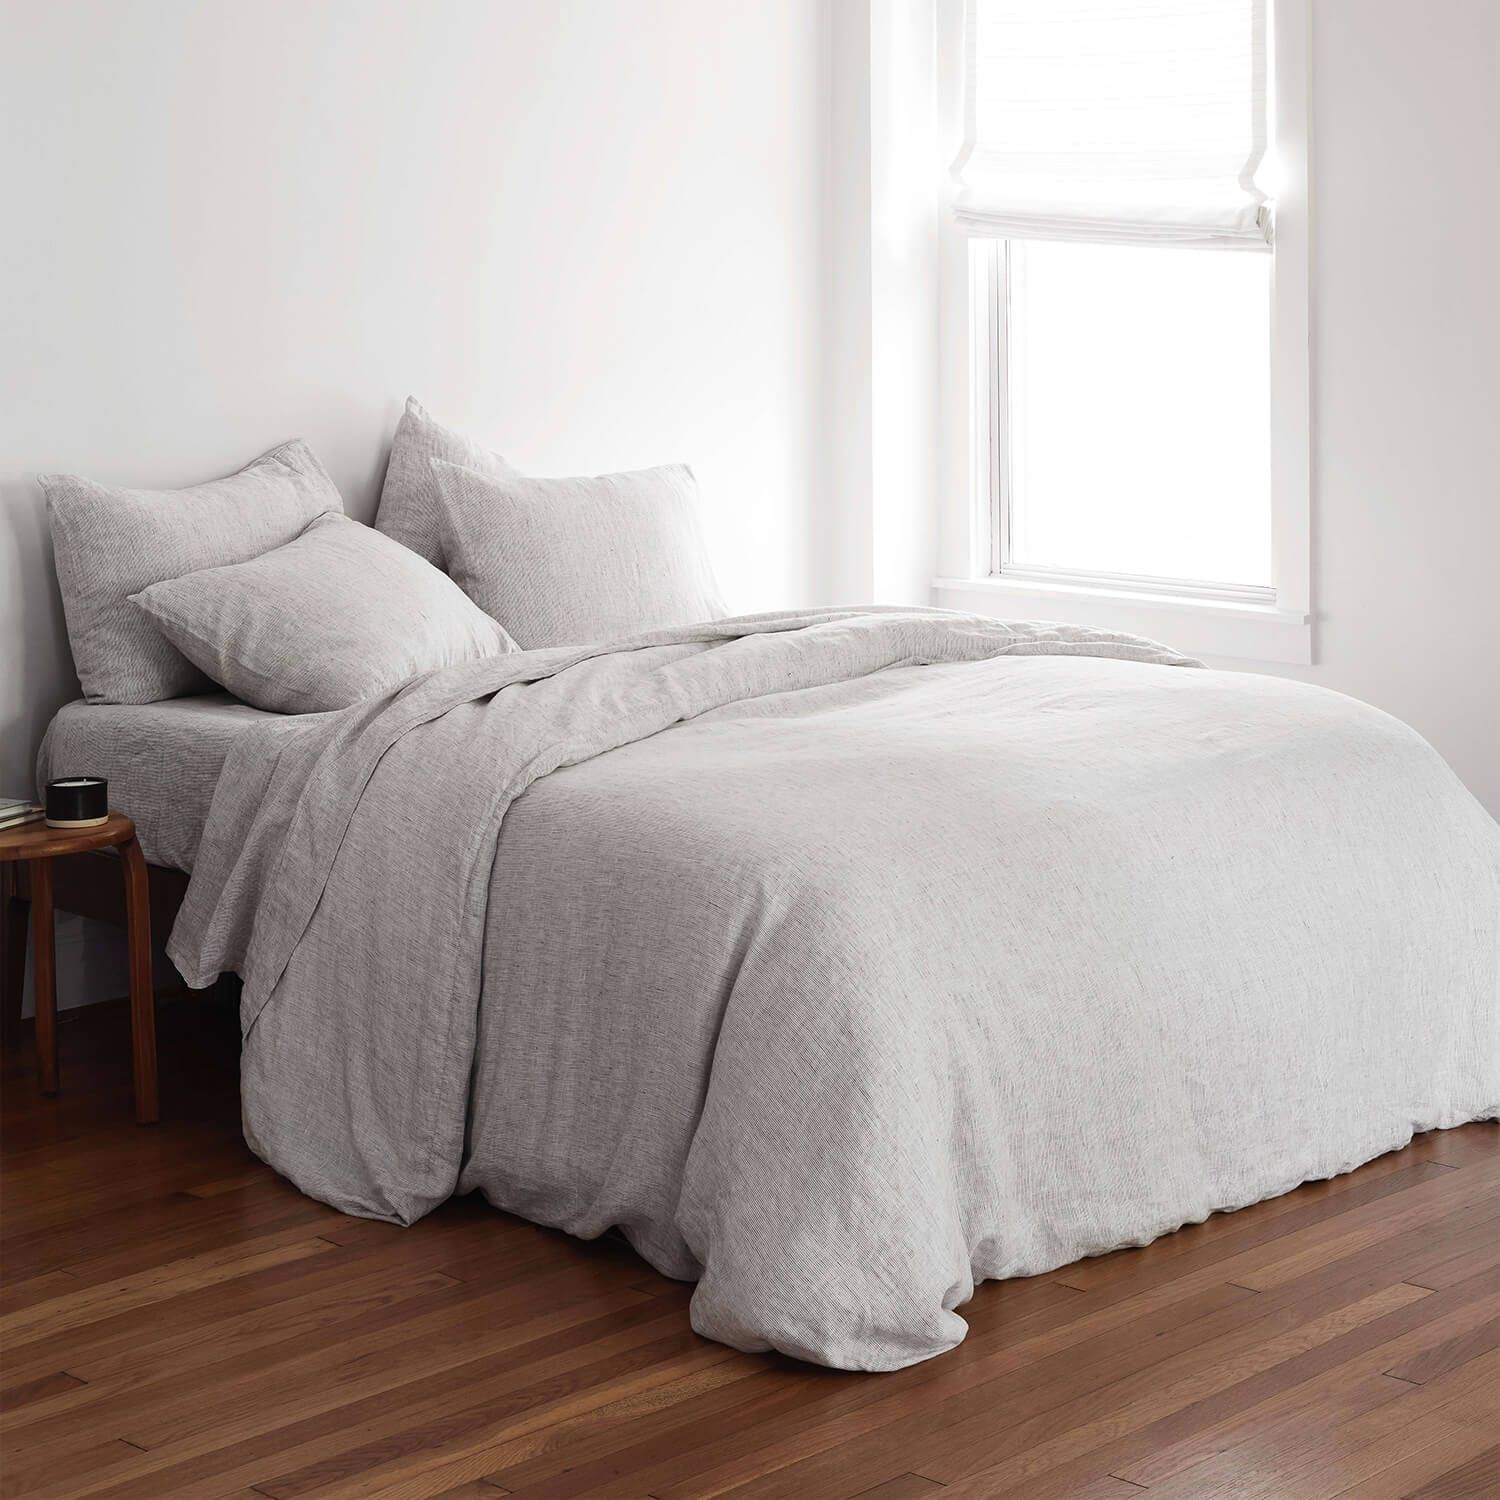 Stonewashed Linen Bed Bundle   – The Citizenry | The Citizenry